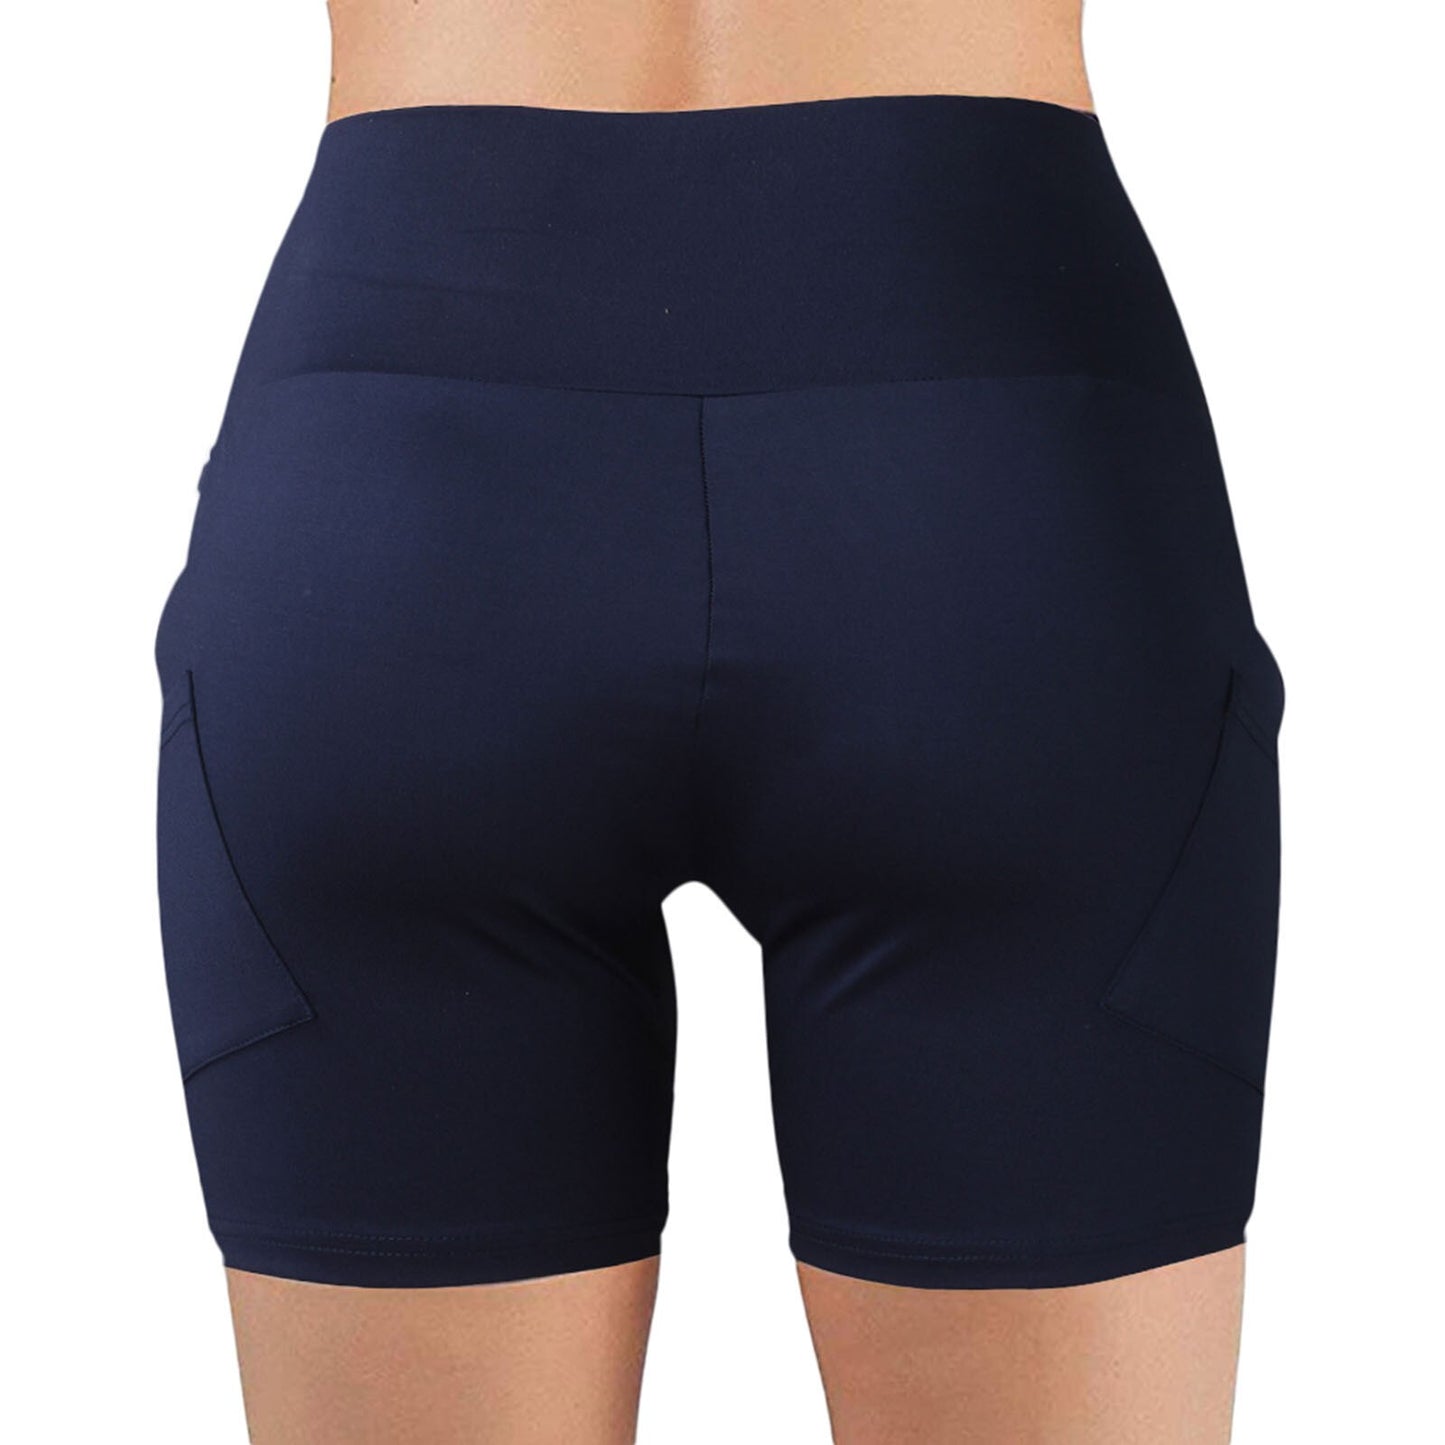 Women's Yoga Quick Dry Shorts with Pockets